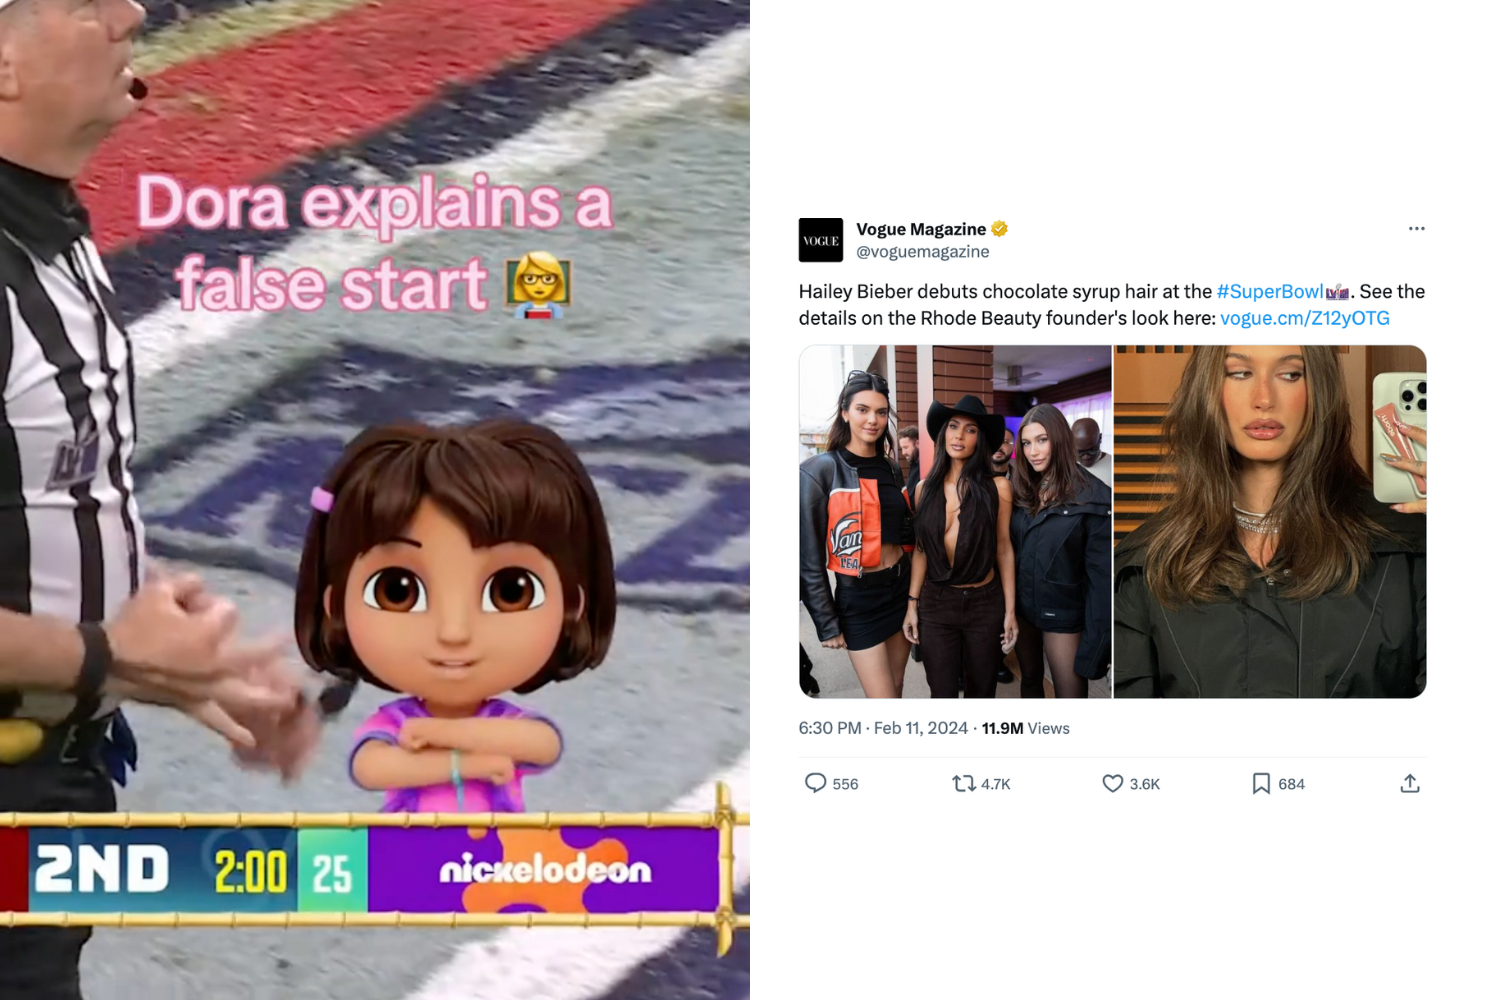 Dora from Dora the Explorer explaining a false start penalty during the Super Bowl in a TikTok video posted by the NFL, and a tweet from Vogue magazine describing Hailey Bieber's "chocolate syrup hair"